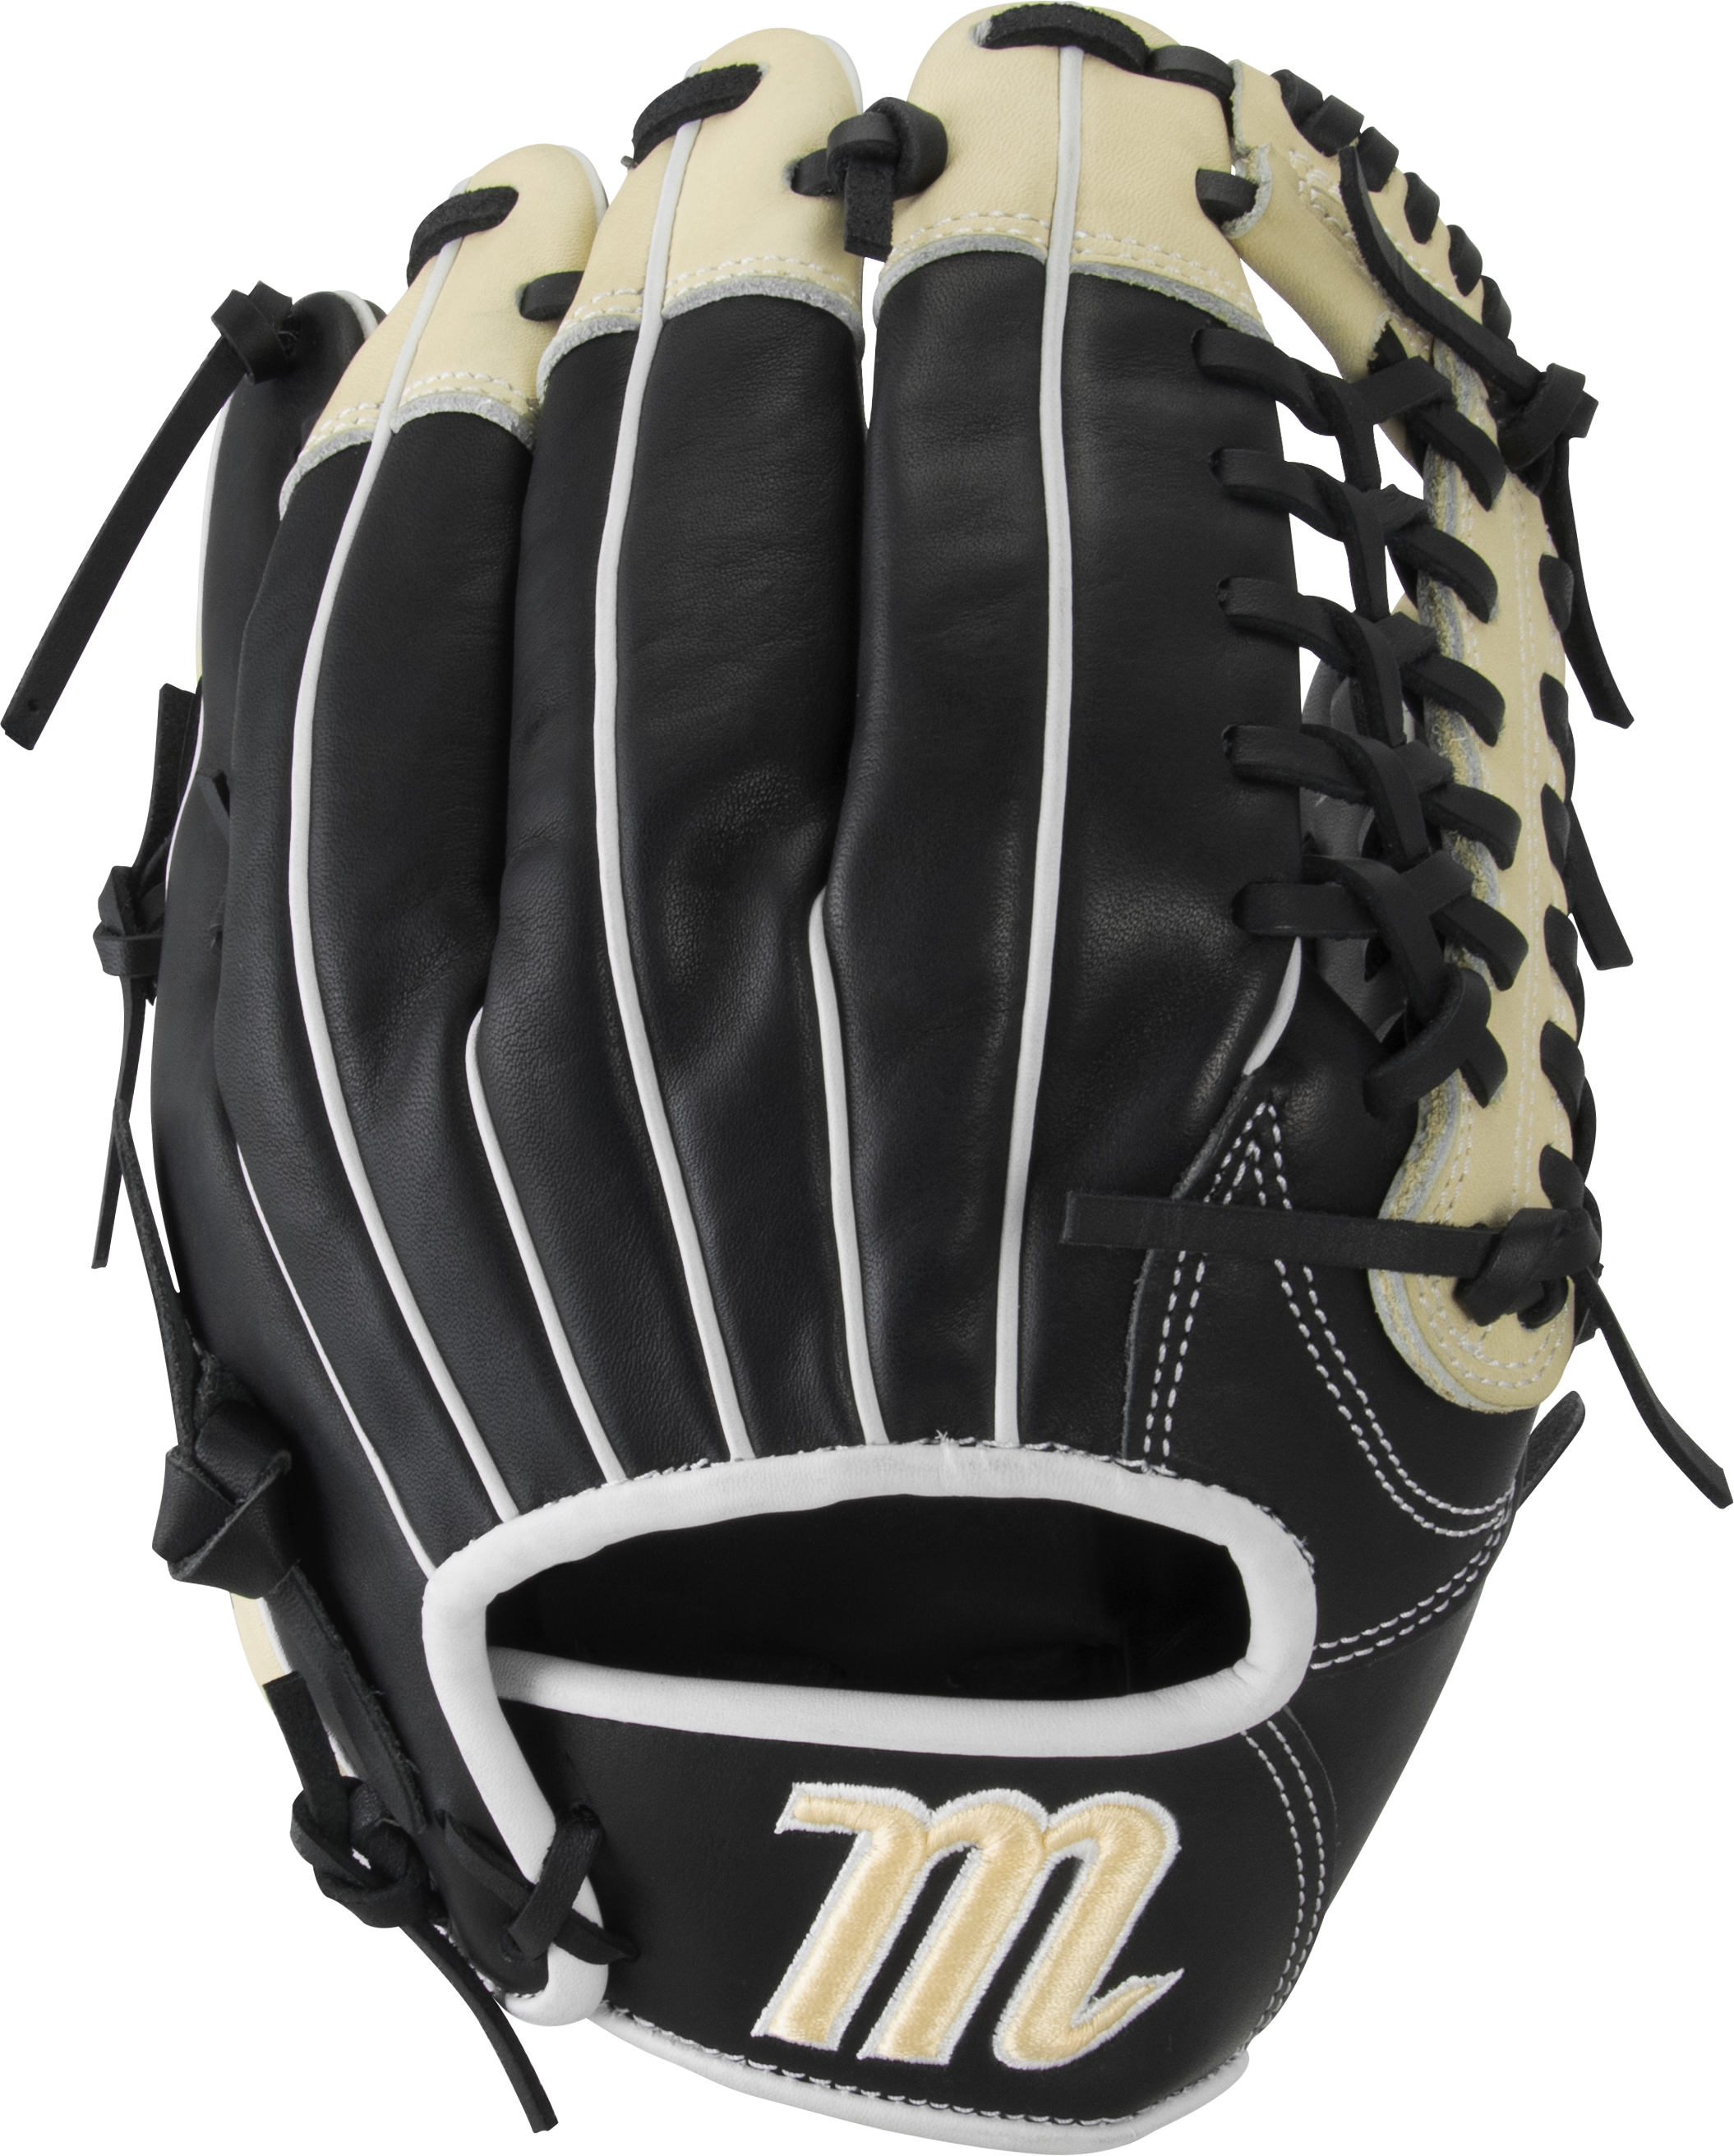 marucci-ascension-as1175y-baseball-glove-11-75-trap-web-right-hand-throw MFGAS1175Y-BKCM-RightHandThrow Marucci 849817099575 Tight-grain steerhide shell leather and palm lining increases durability while reducing